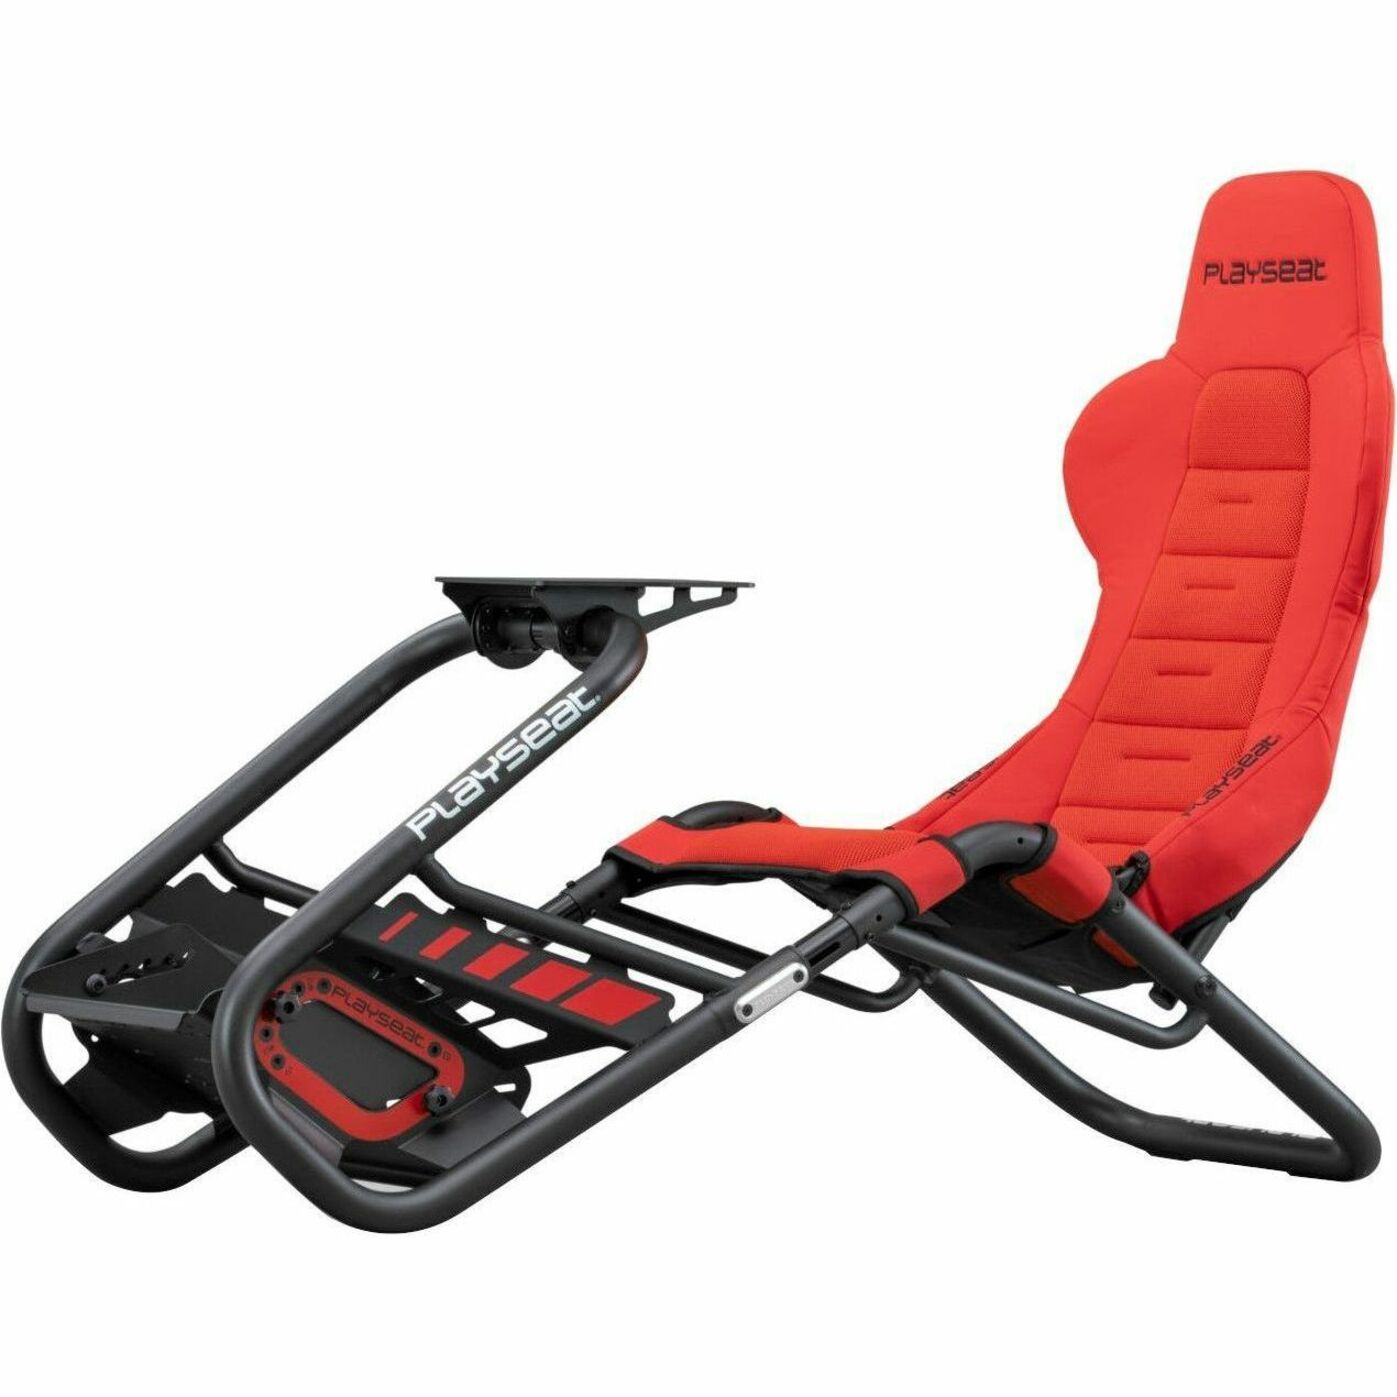 Playseats Trophy Red Gaming Chair, Adjustable Seat Height, Comfortable